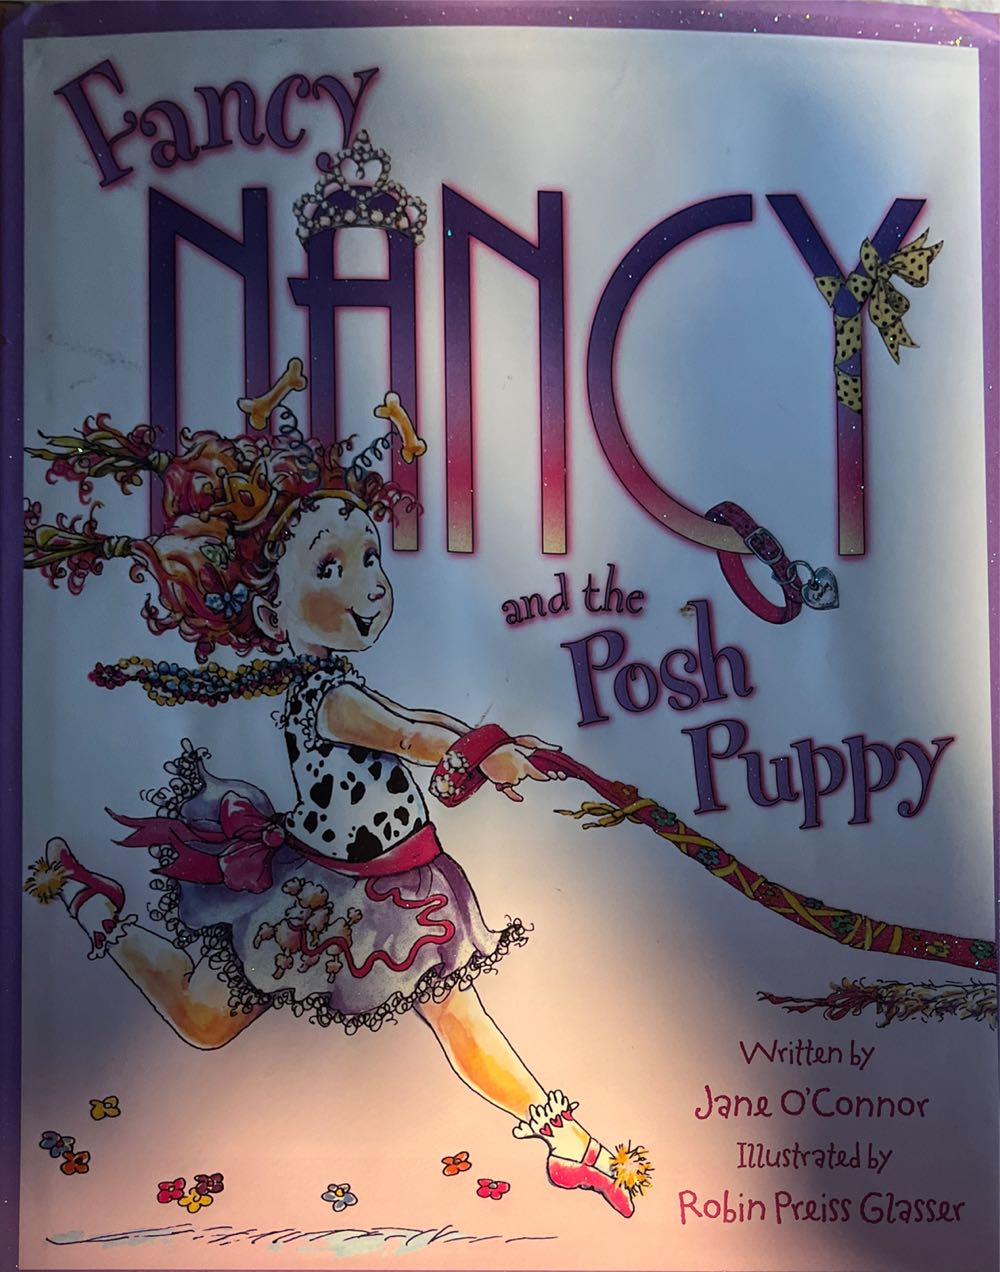 Fancy Nancy and the Posh Puppy - Jane O’Connor (Harper Collins Children’s - Hardcover) book collectible [Barcode 9780060542139] - Main Image 3